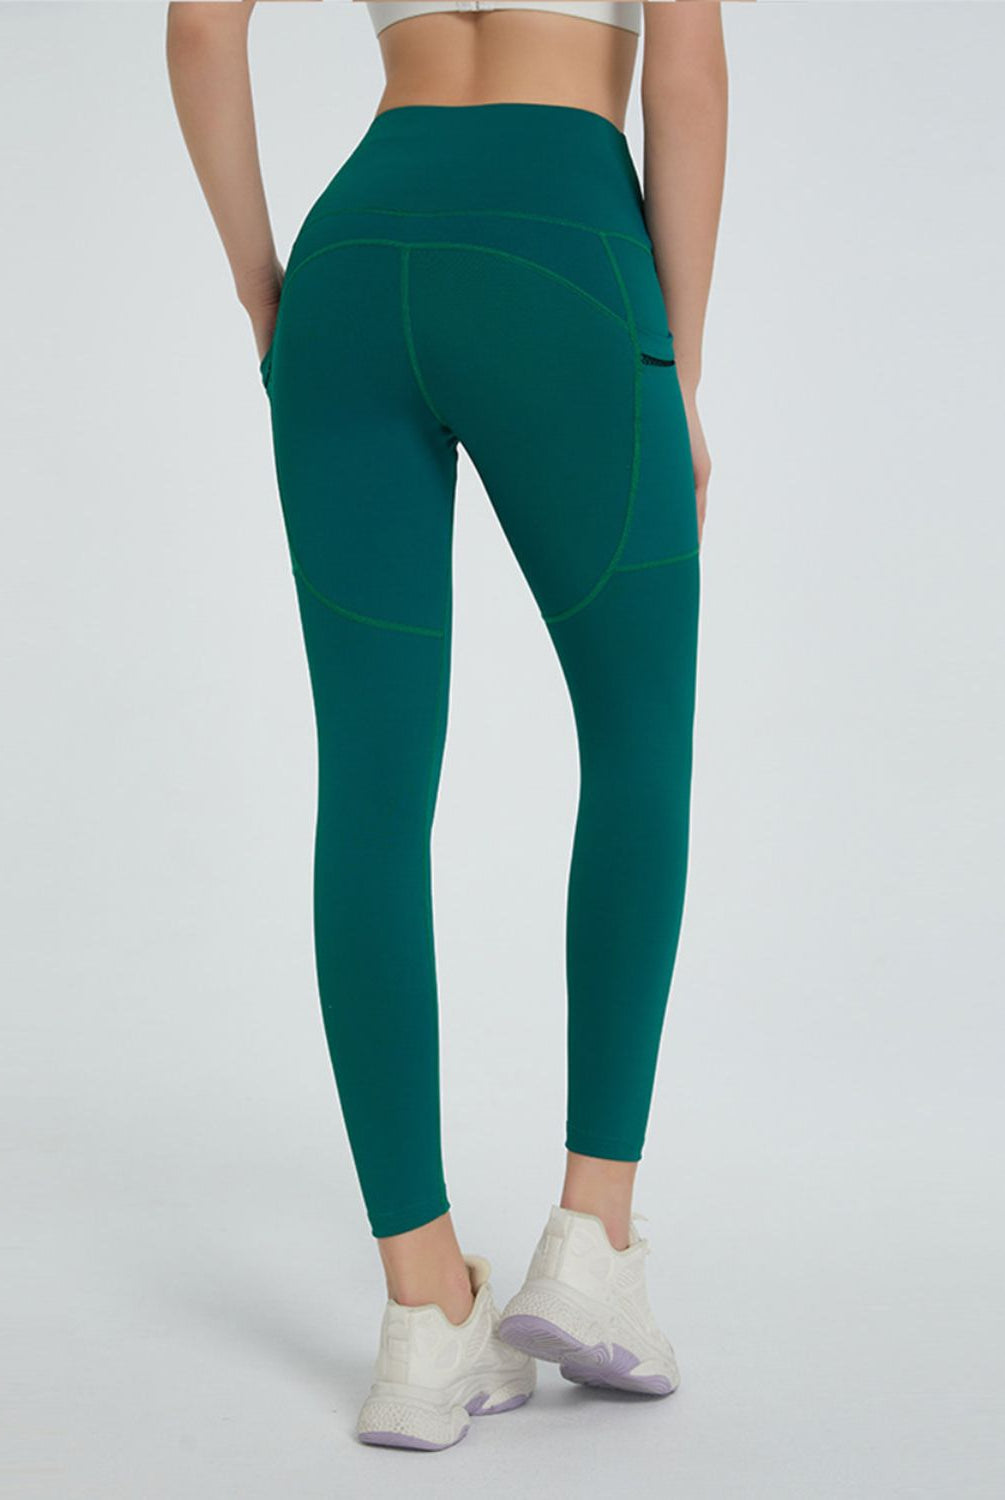 Active woman posing in versatile high-waisted leggings with a handy pocket, paired with athletic sneakers.